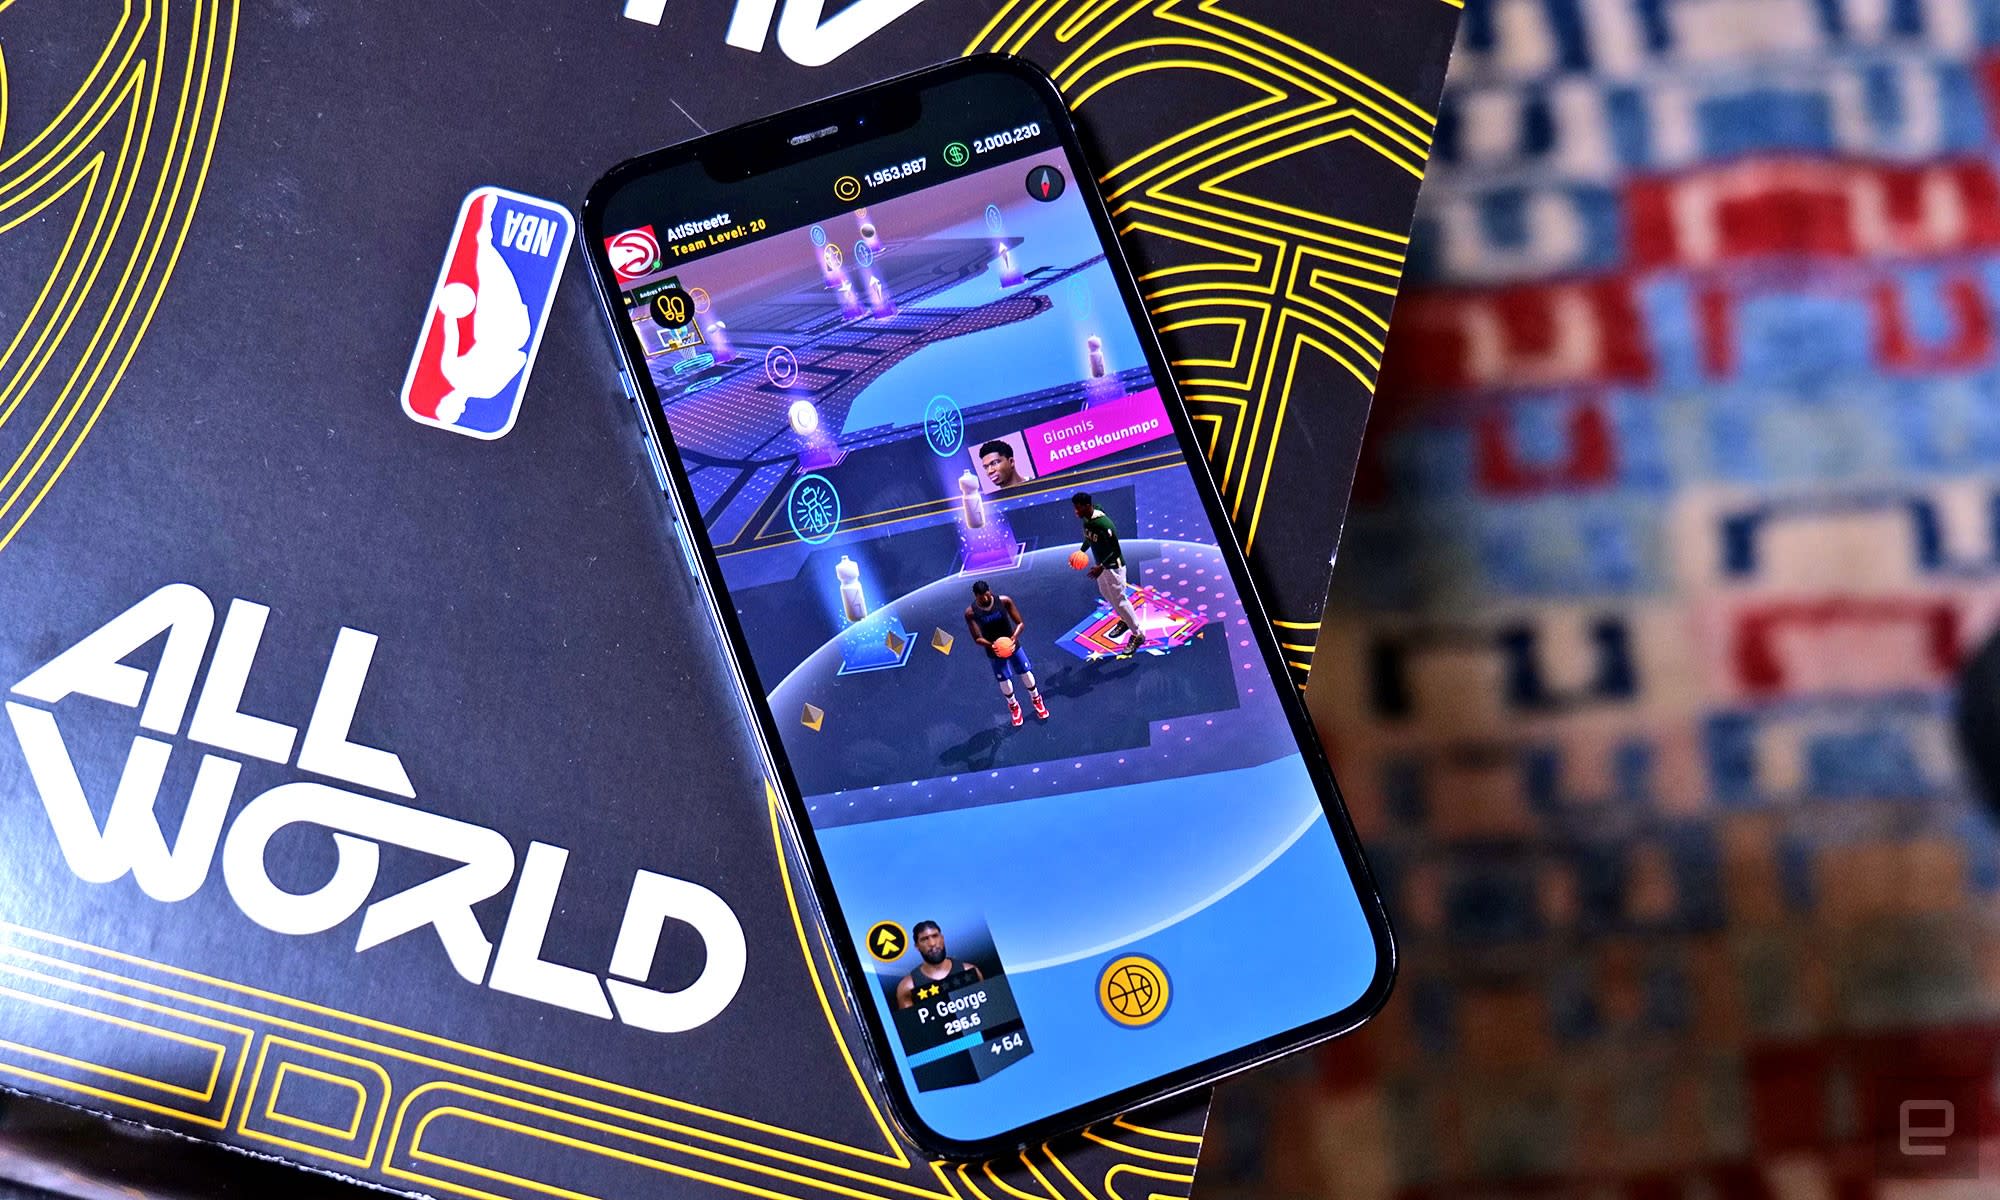 On January 24th, Niantic released its latest game called NBA All-World, which puts the company's location-based tech in a new basketball app designed to encourage players to visit real-world courts. 